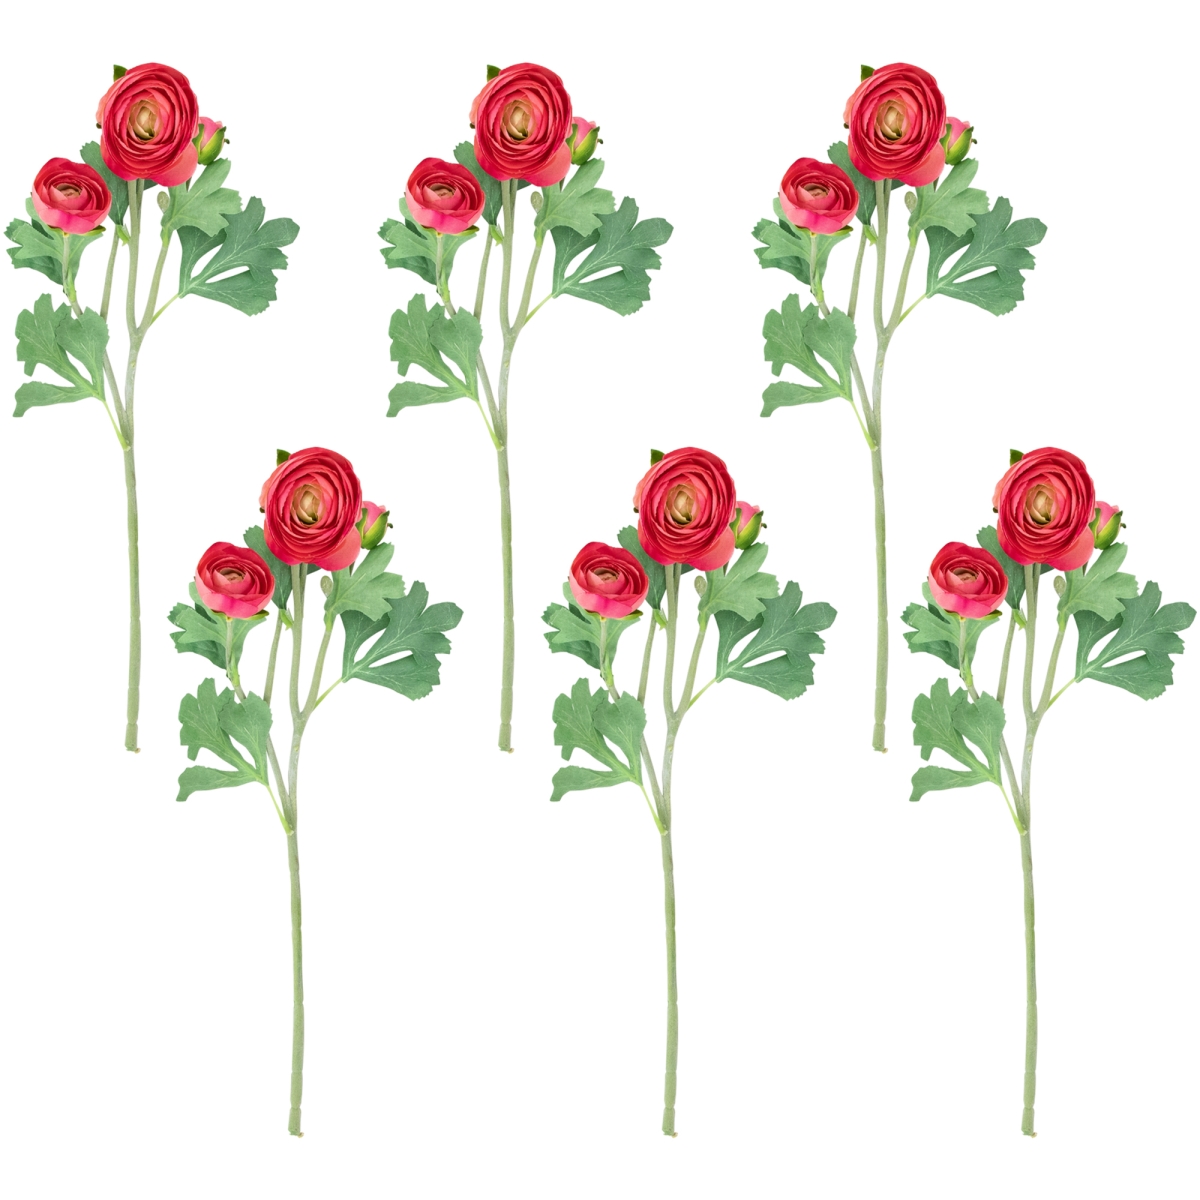 Picture of Northlight 35644515 21 in. Ranunculus Artificial Floral Sprays, Coral Pink - Set of 6